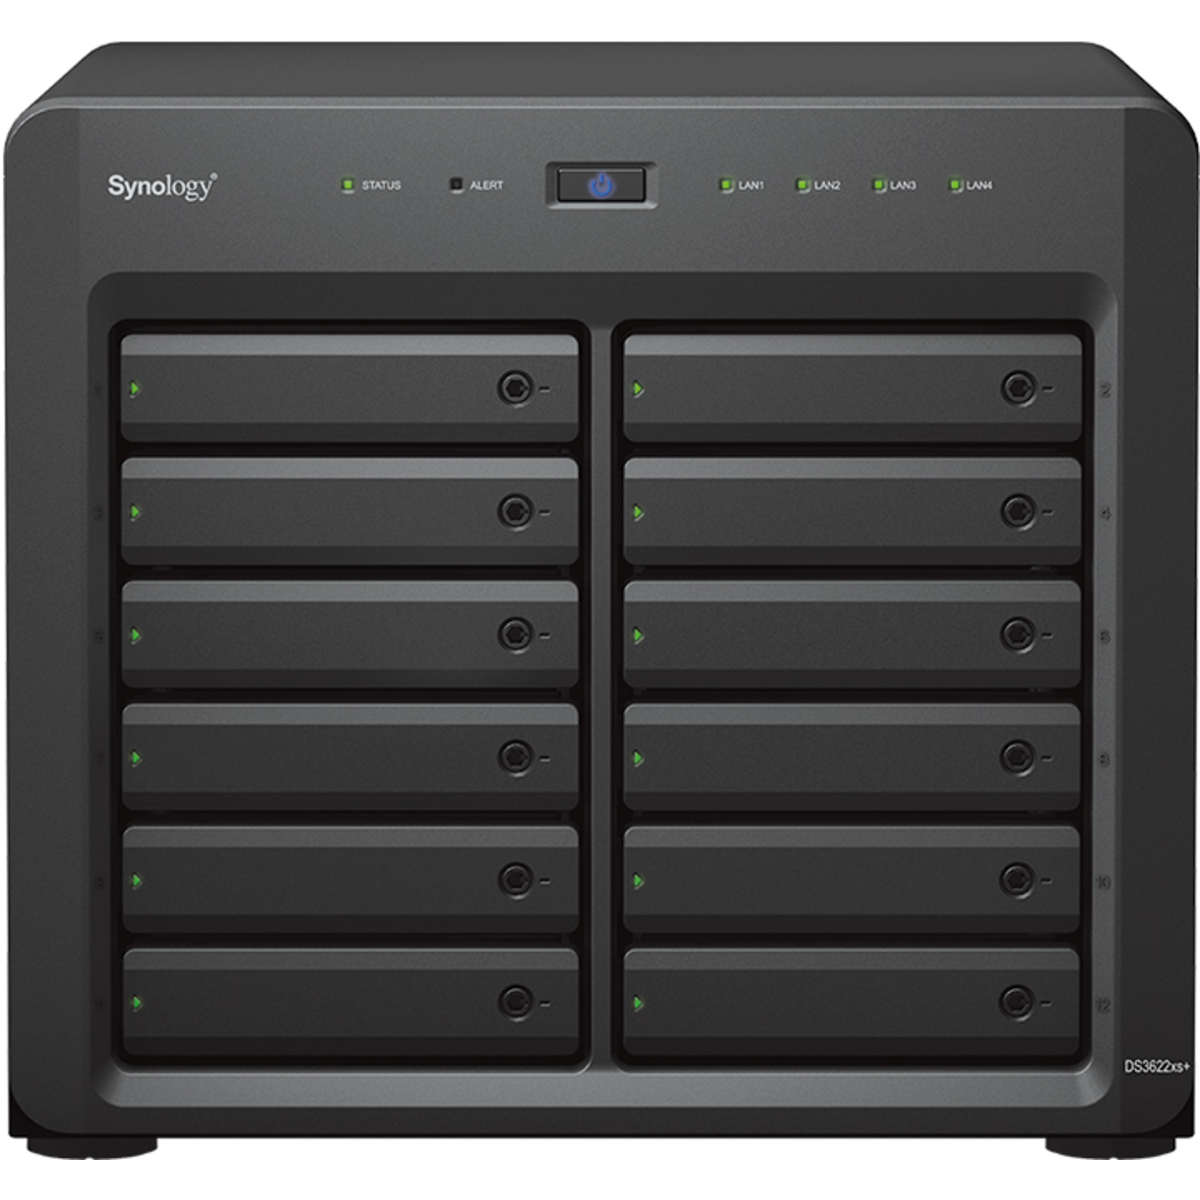 Synology DiskStation DS3622xs+ 64tb 12-Bay Desktop Multimedia / Power User / Business NAS - Network Attached Storage Device 8x8tb Western Digital Red Plus WD80EFPX 3.5 7200rpm SATA 6Gb/s HDD NAS Class Drives Installed - Burn-In Tested DiskStation DS3622xs+